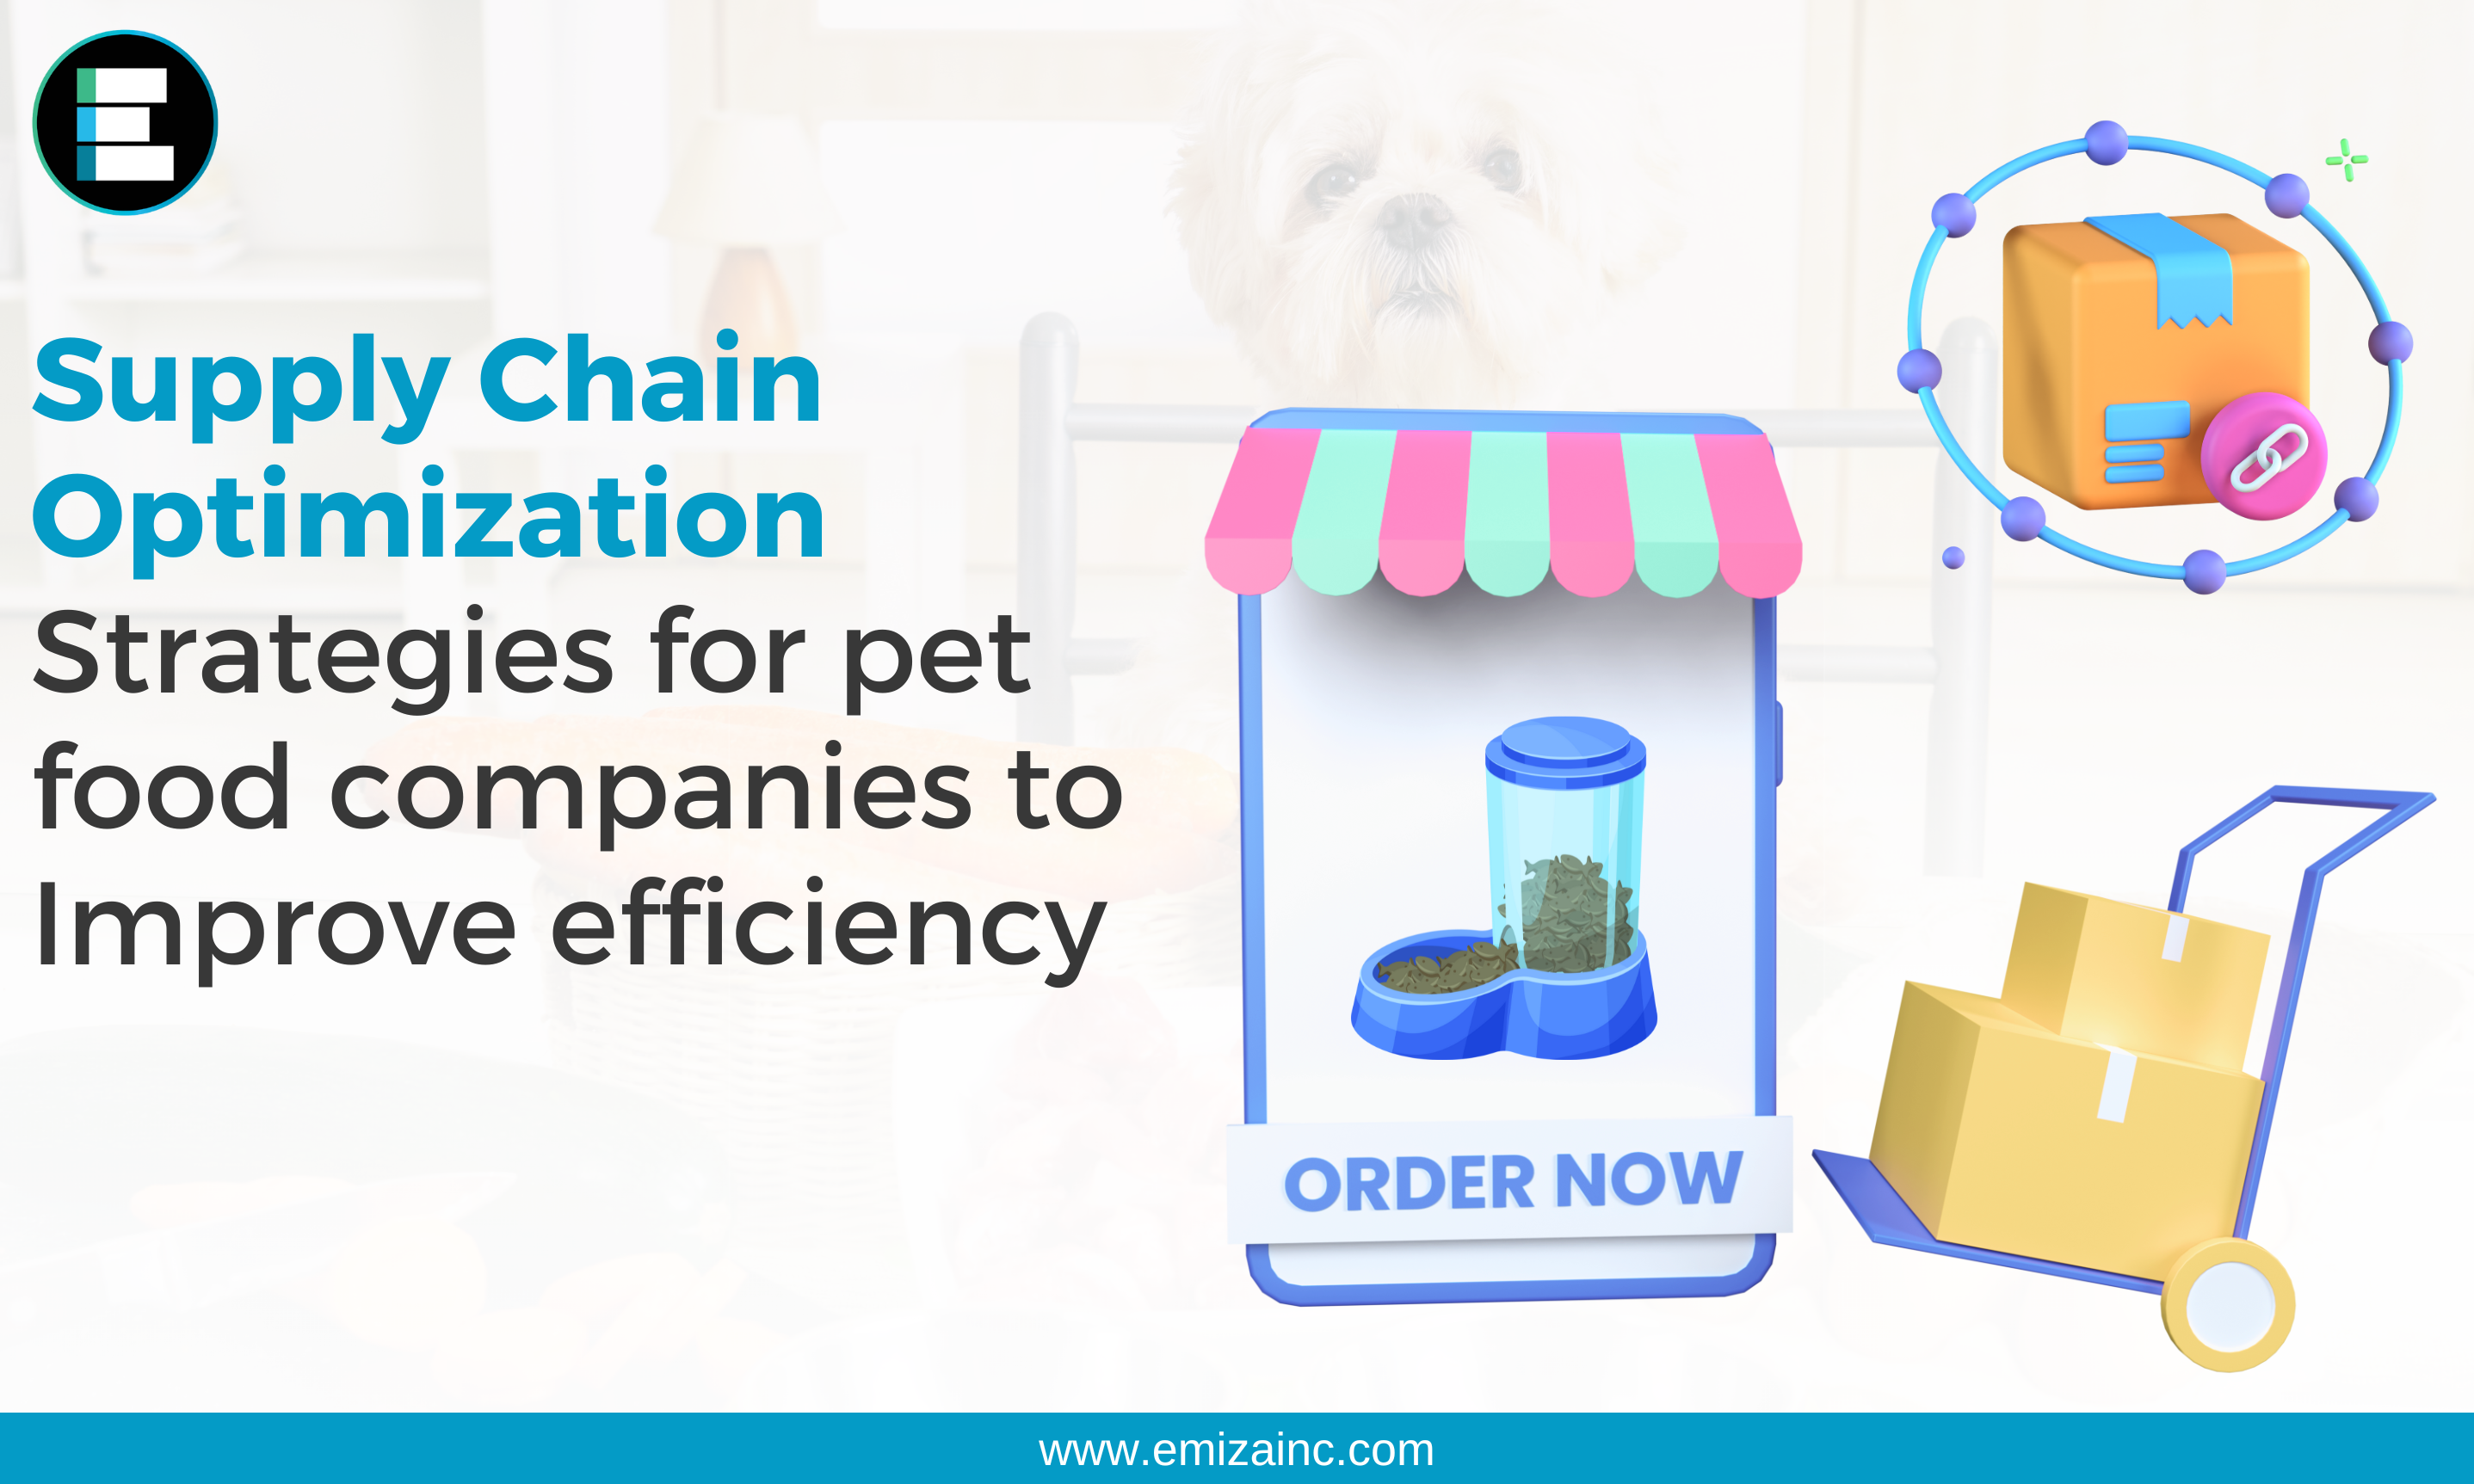 Supply Chain Optimization: Strategies for pet food companies to Improve Efficiency